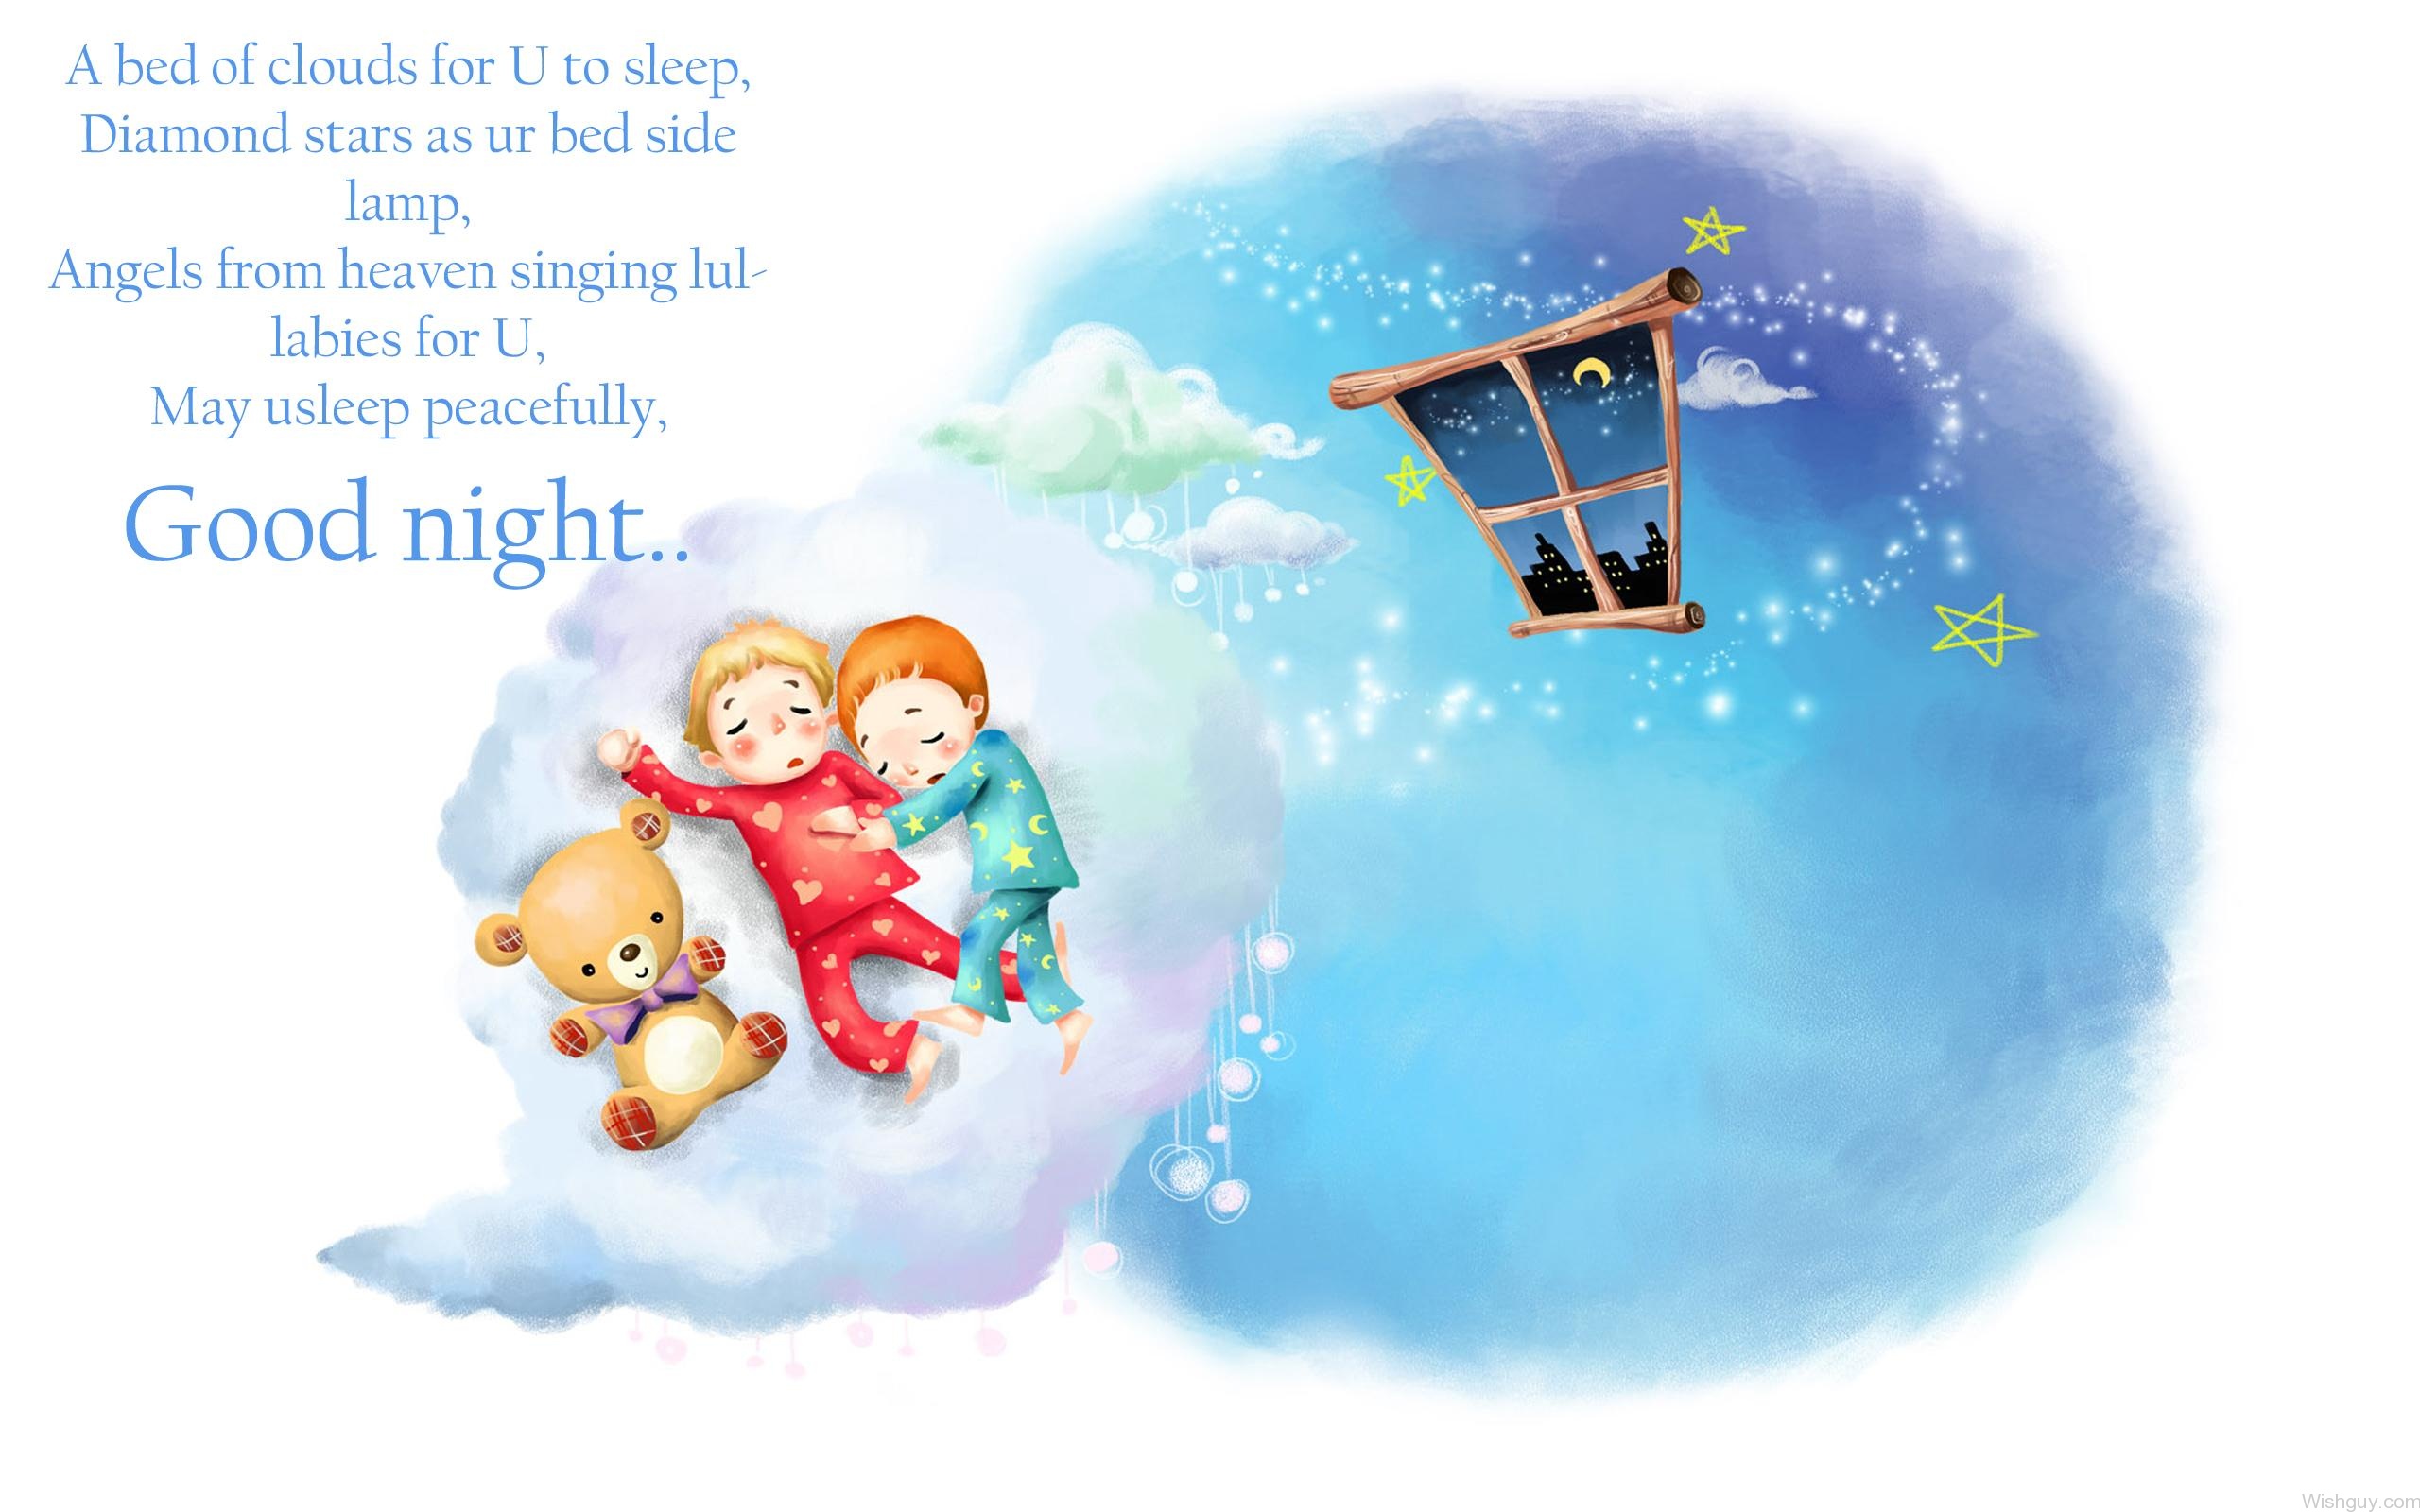 Good Night Poem - Wishes, Greetings, Pictures – Wish Guy